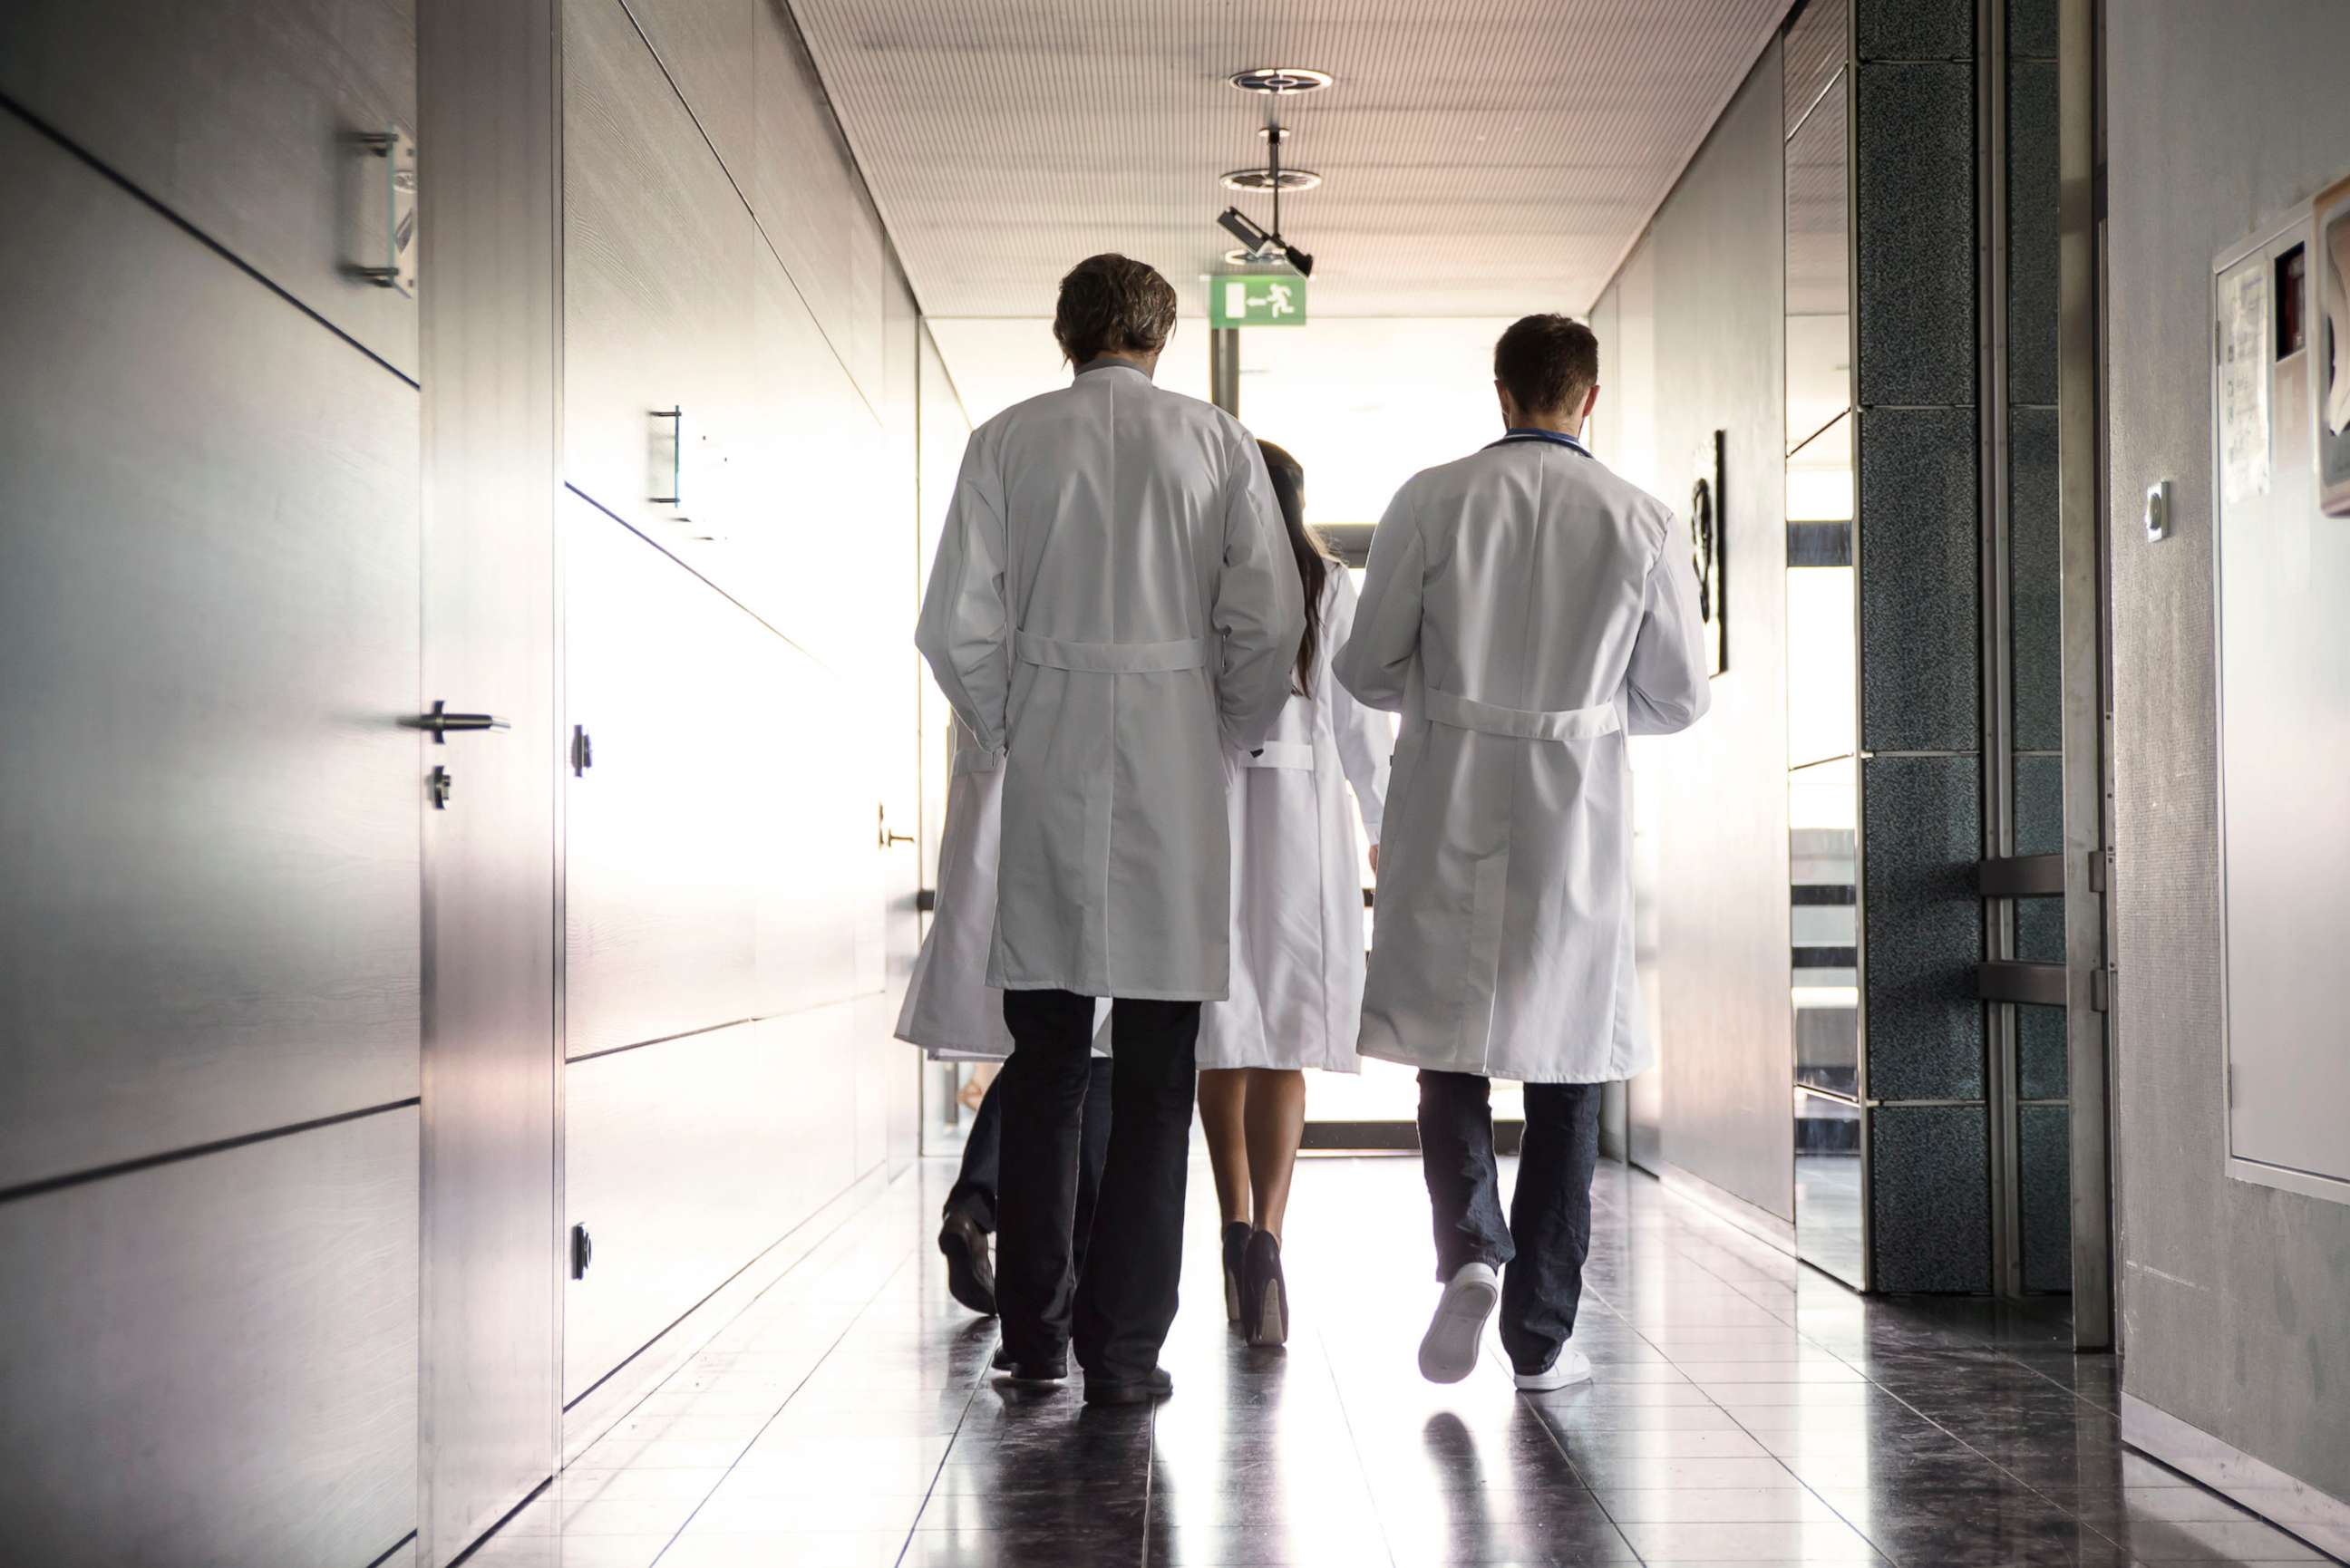 PHOTO: In this undated file photo, doctors walk down a hospital hallway.